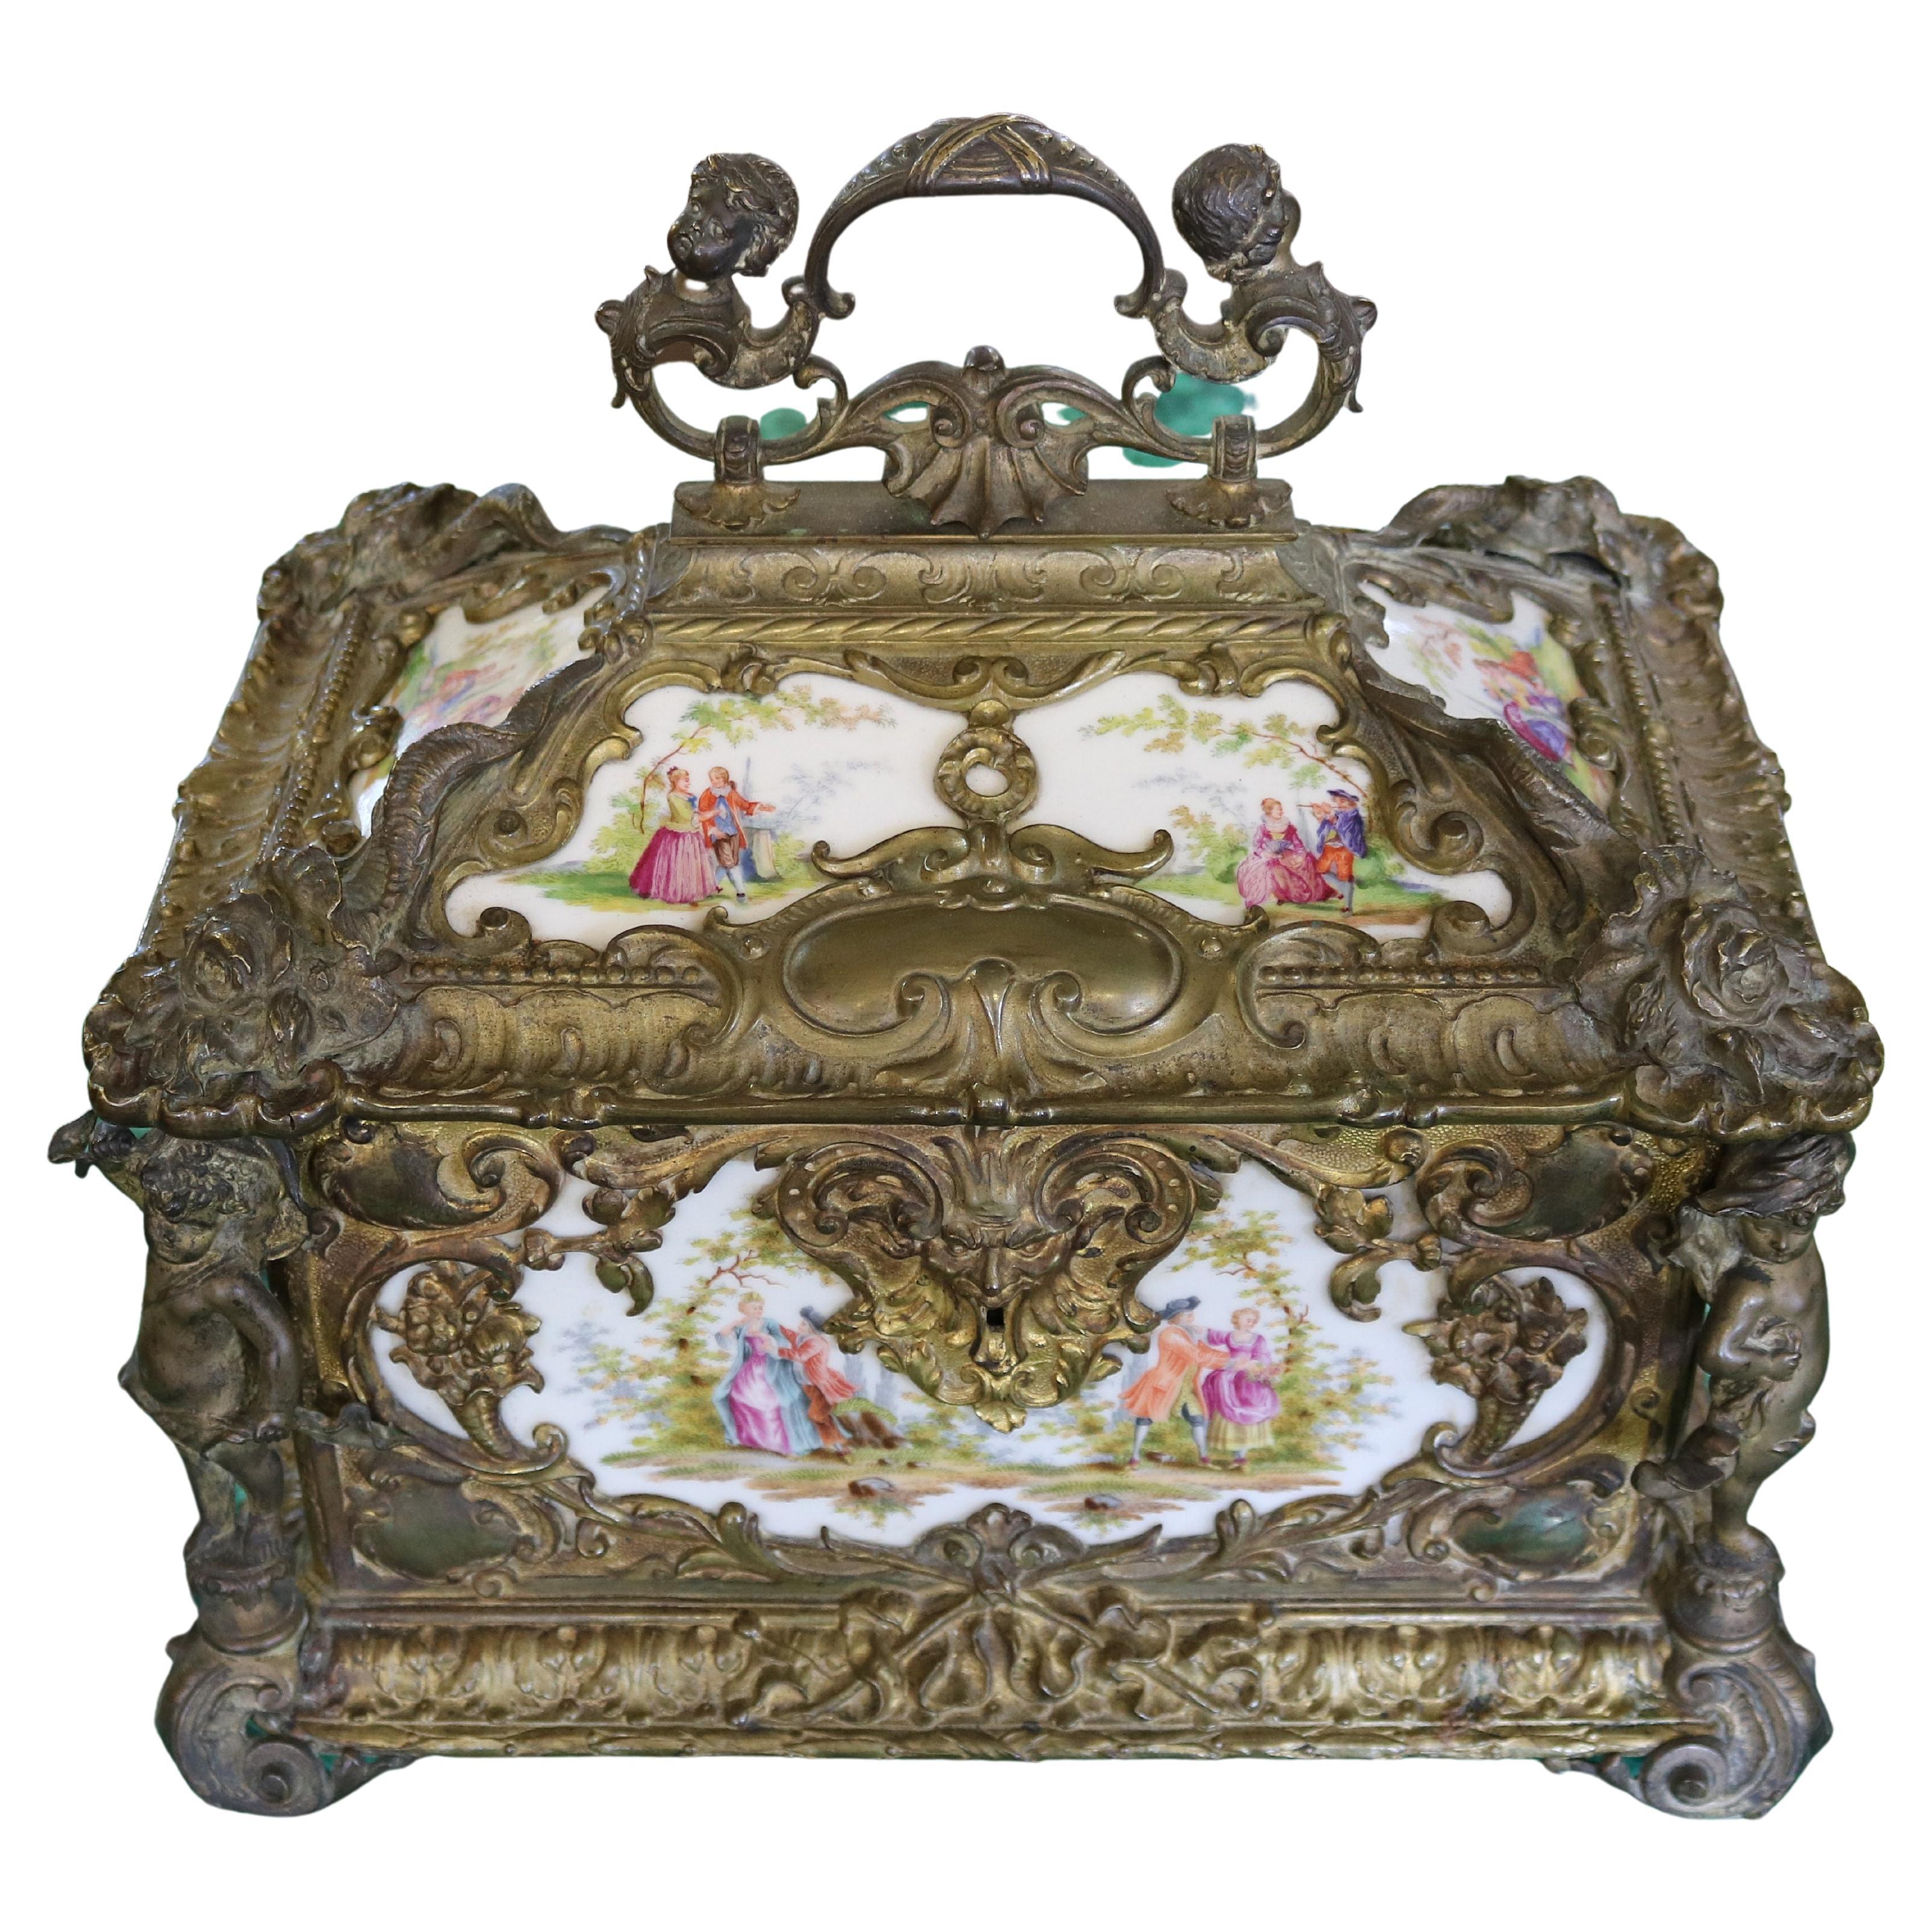 Outstanding Large 19th Century Bronze & Porcelain Jewelry Casket Box For Sale